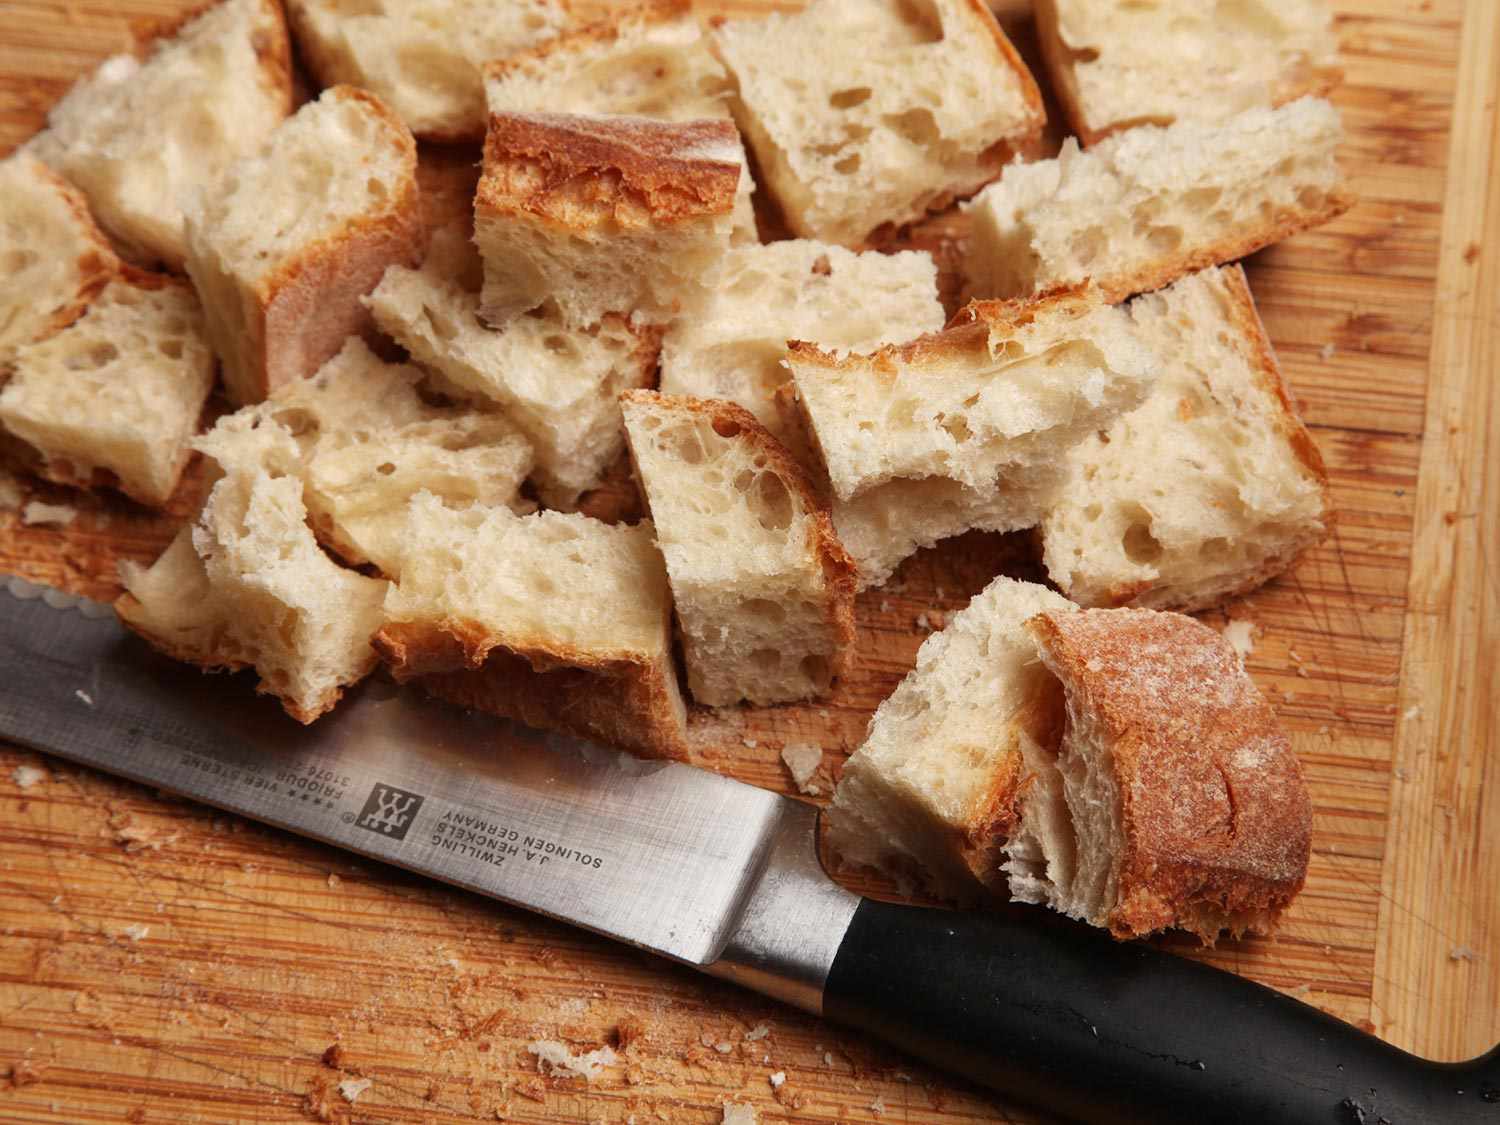 Cubed crusty bread on a wooden cutting board, next to a knife